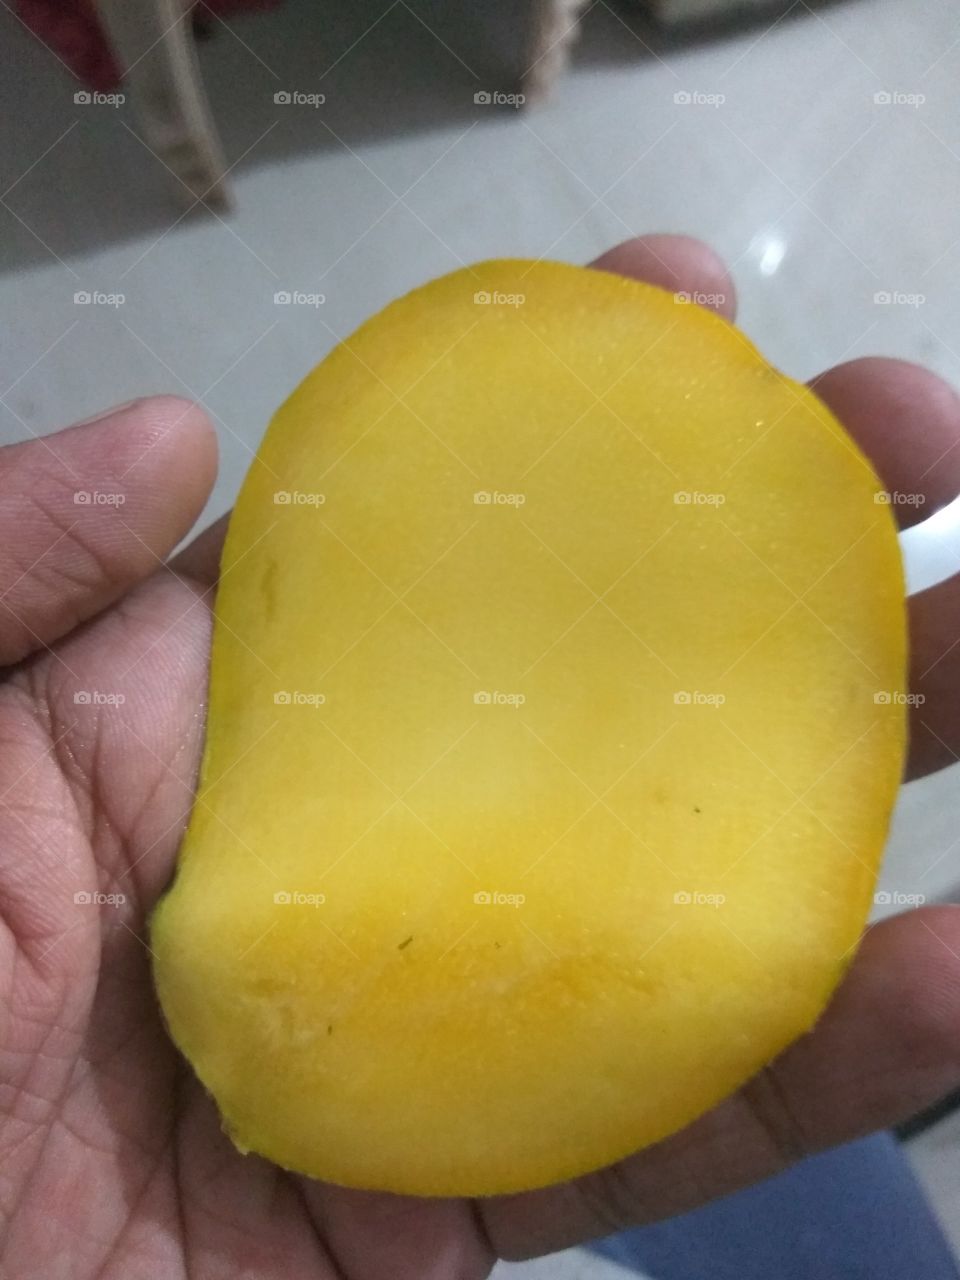 My love for mangoes